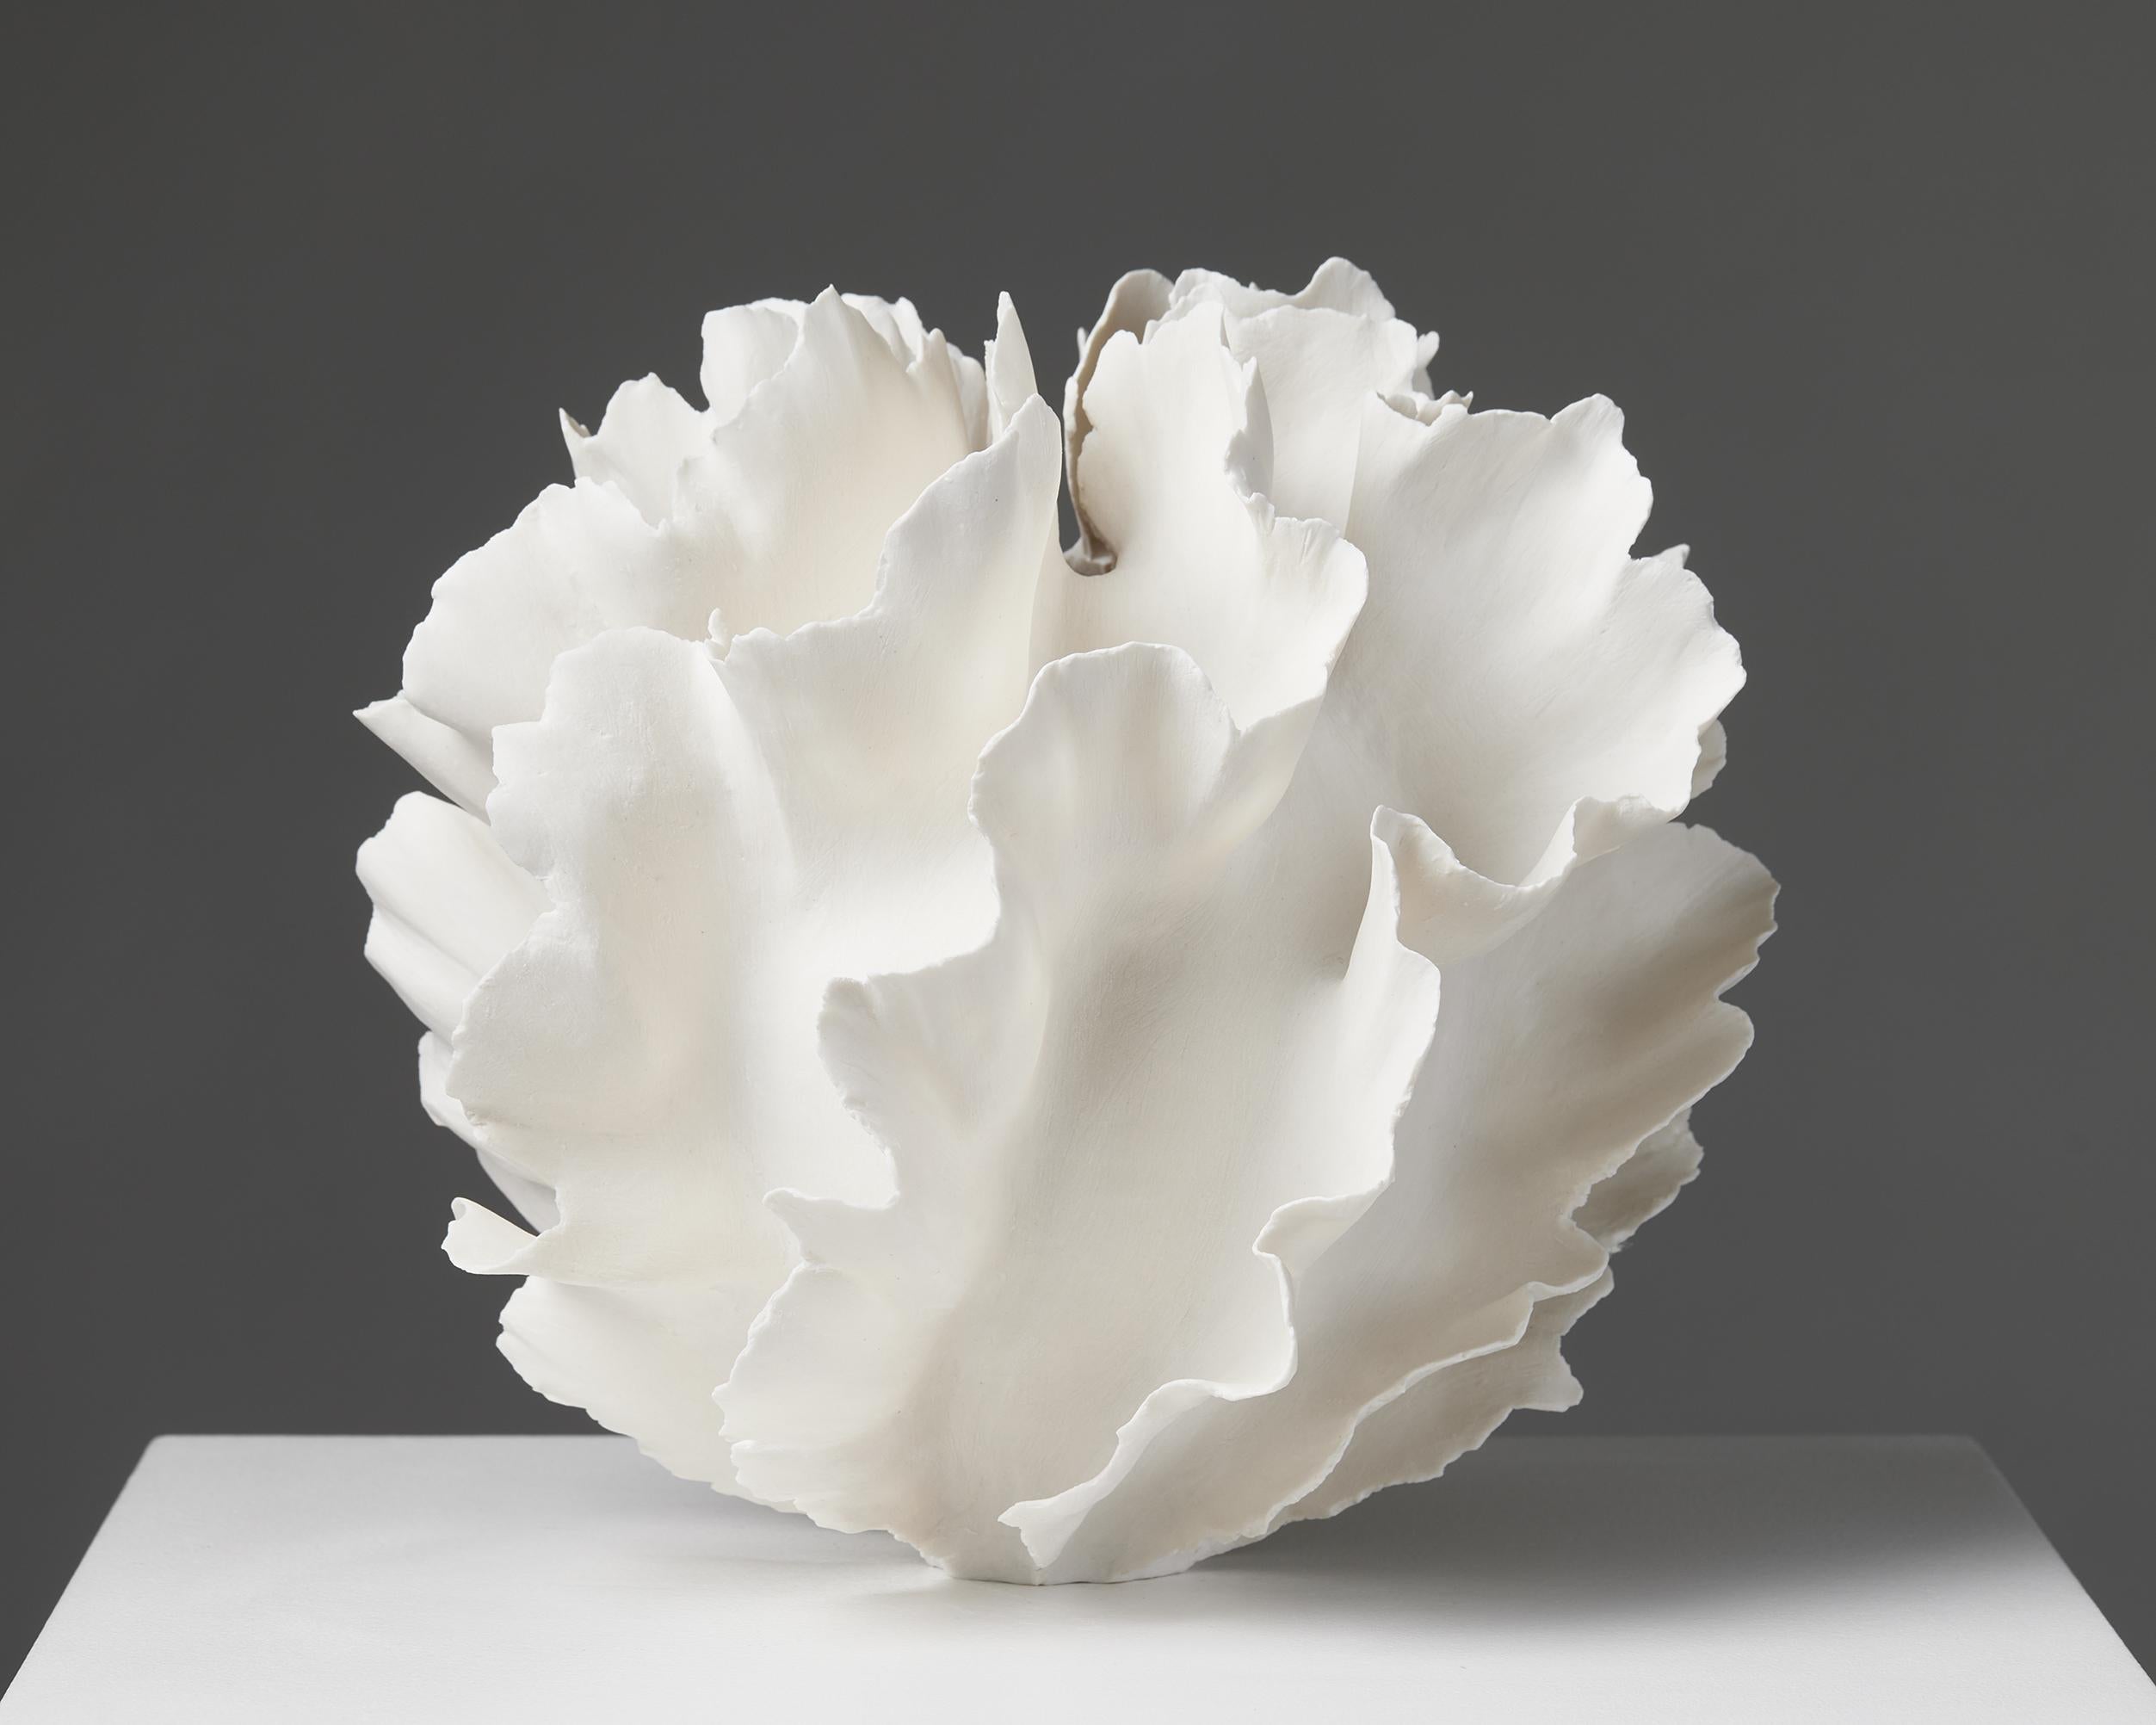 Porcelain. 

Unique. 

Signed.

Sandra Davolio is an acclaimed contemporary Danish-Italian ceramic artist who has been represented by Modernity for more than ten years. Davolio takes her inspiration from nature and the ceramic traditions of